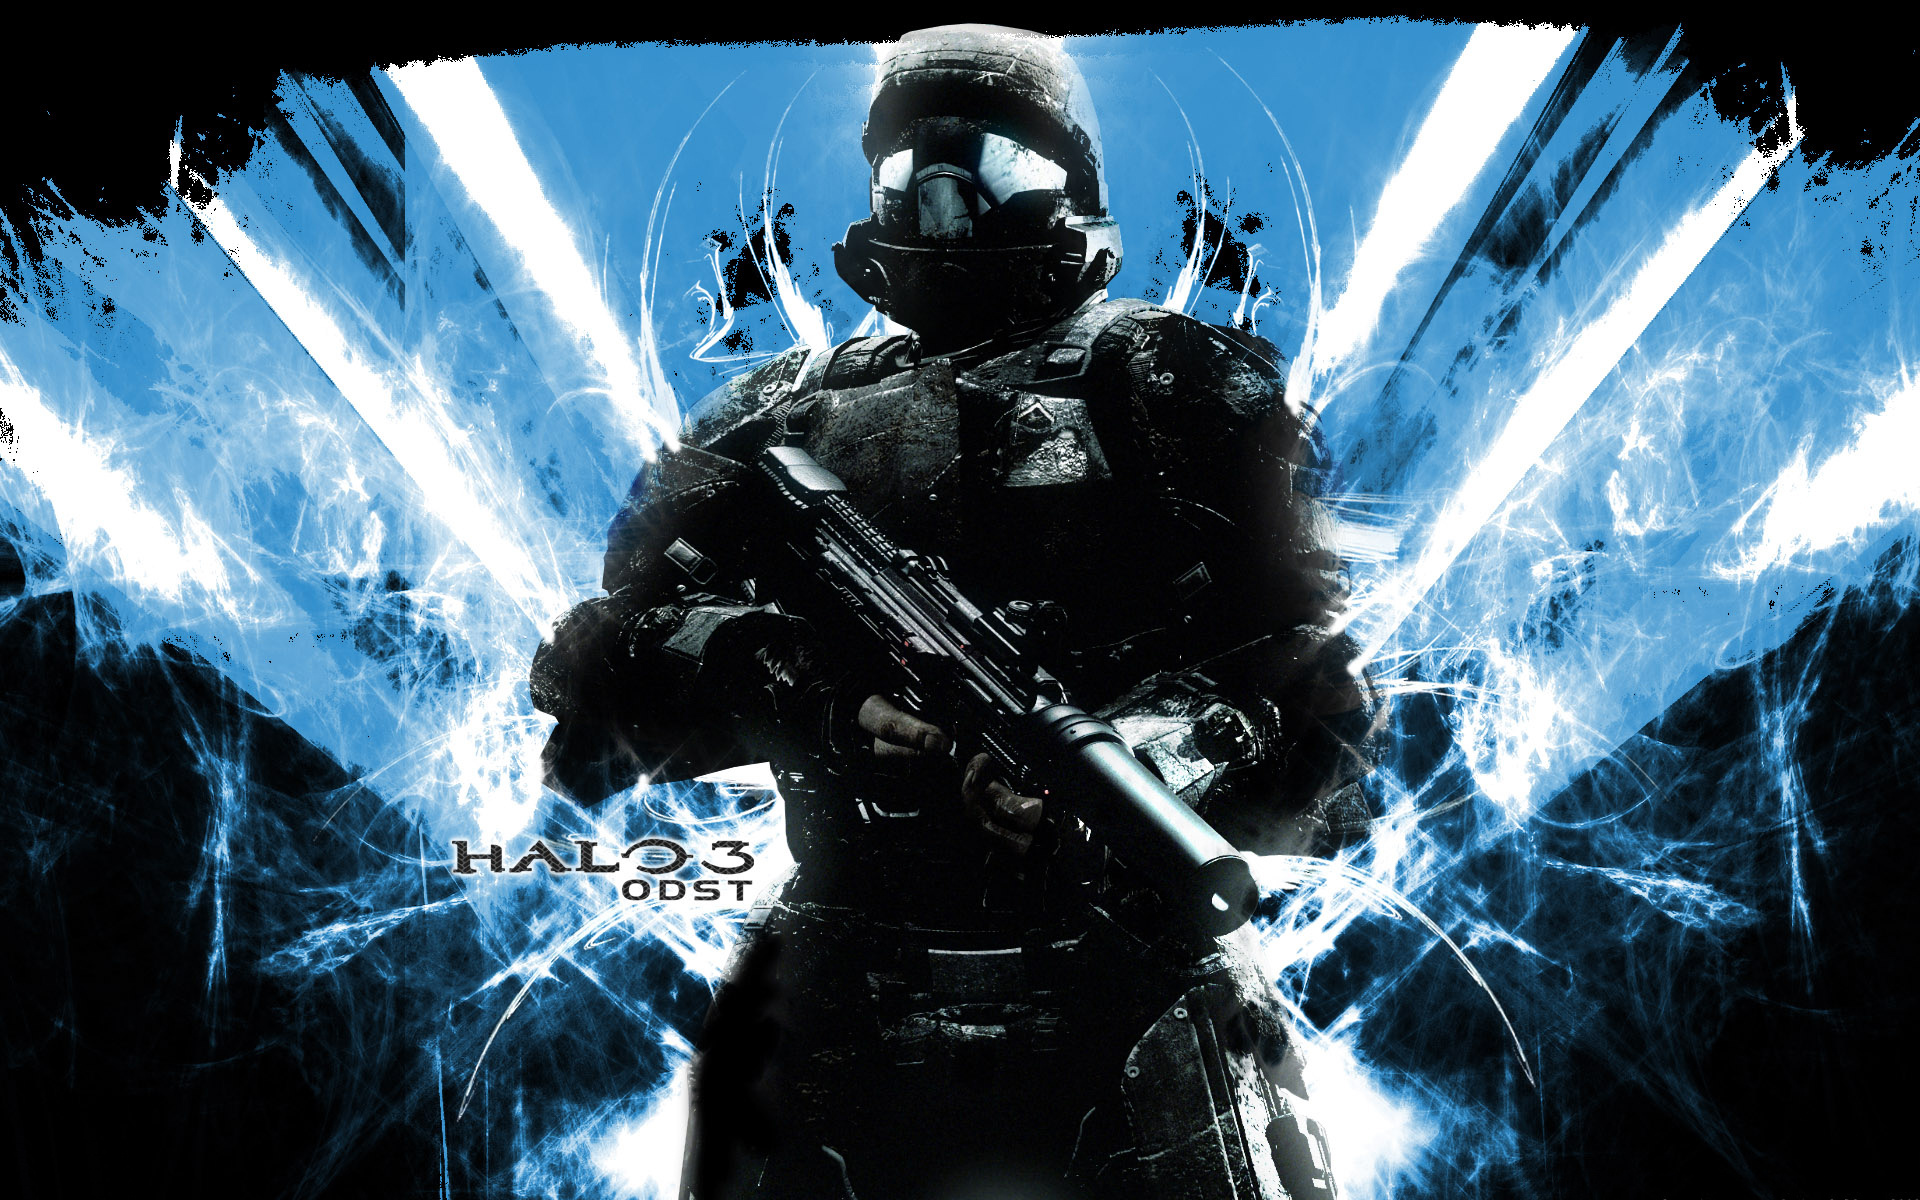 Halo 3: ODST, Sticky grenade wallpapers, Explosive artwork, Gaming collection, 1920x1200 HD Desktop